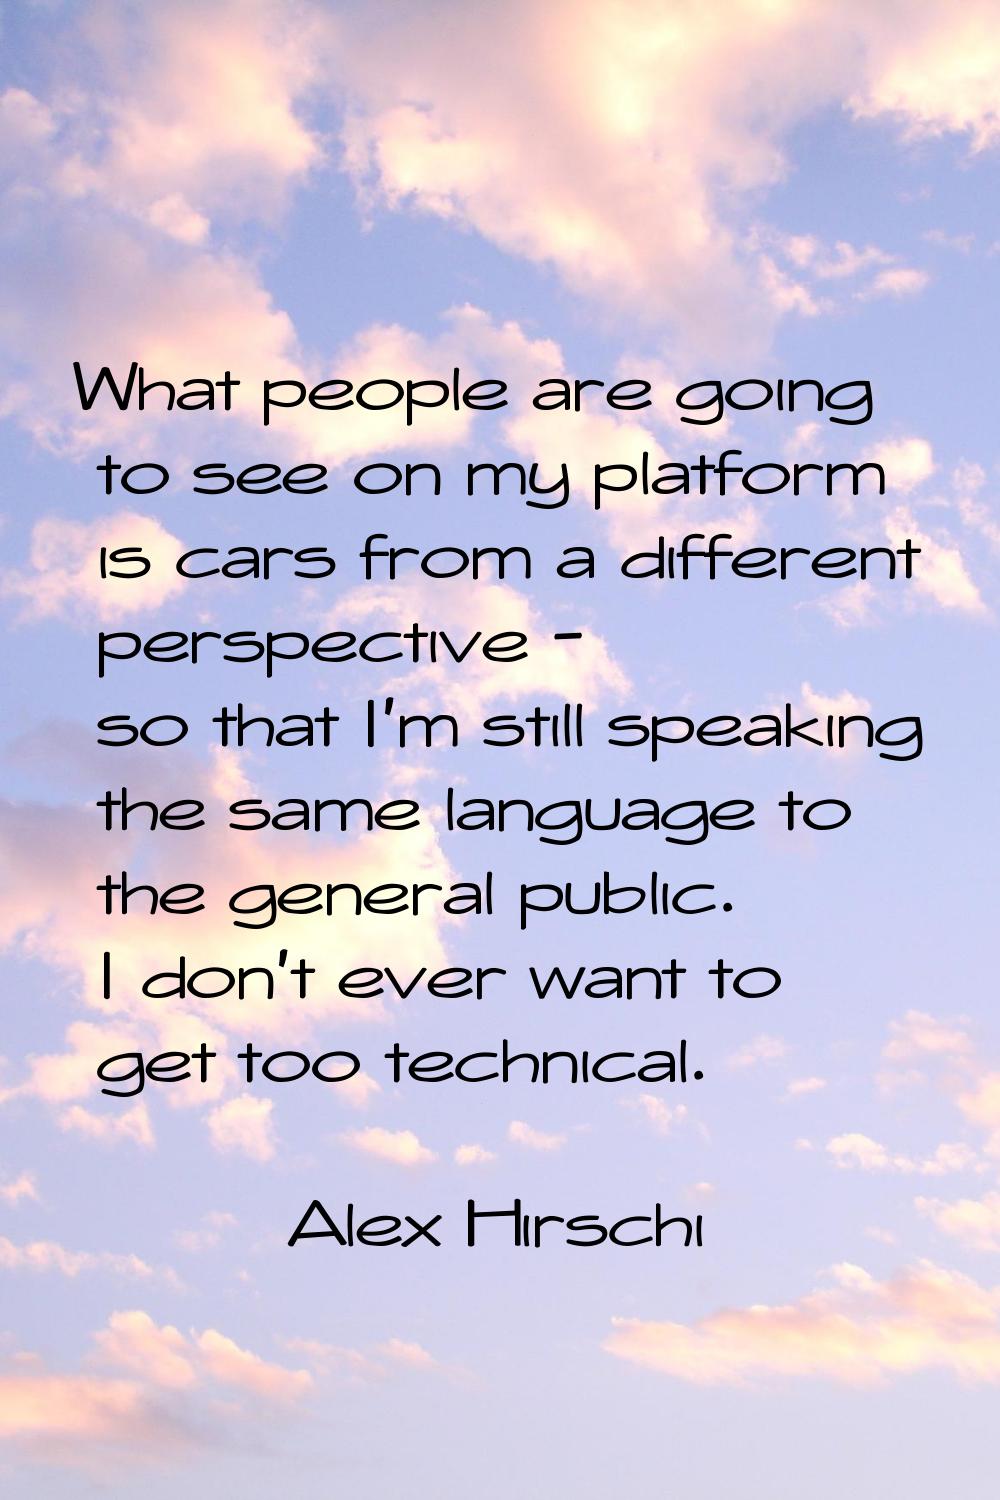 What people are going to see on my platform is cars from a different perspective - so that I'm stil